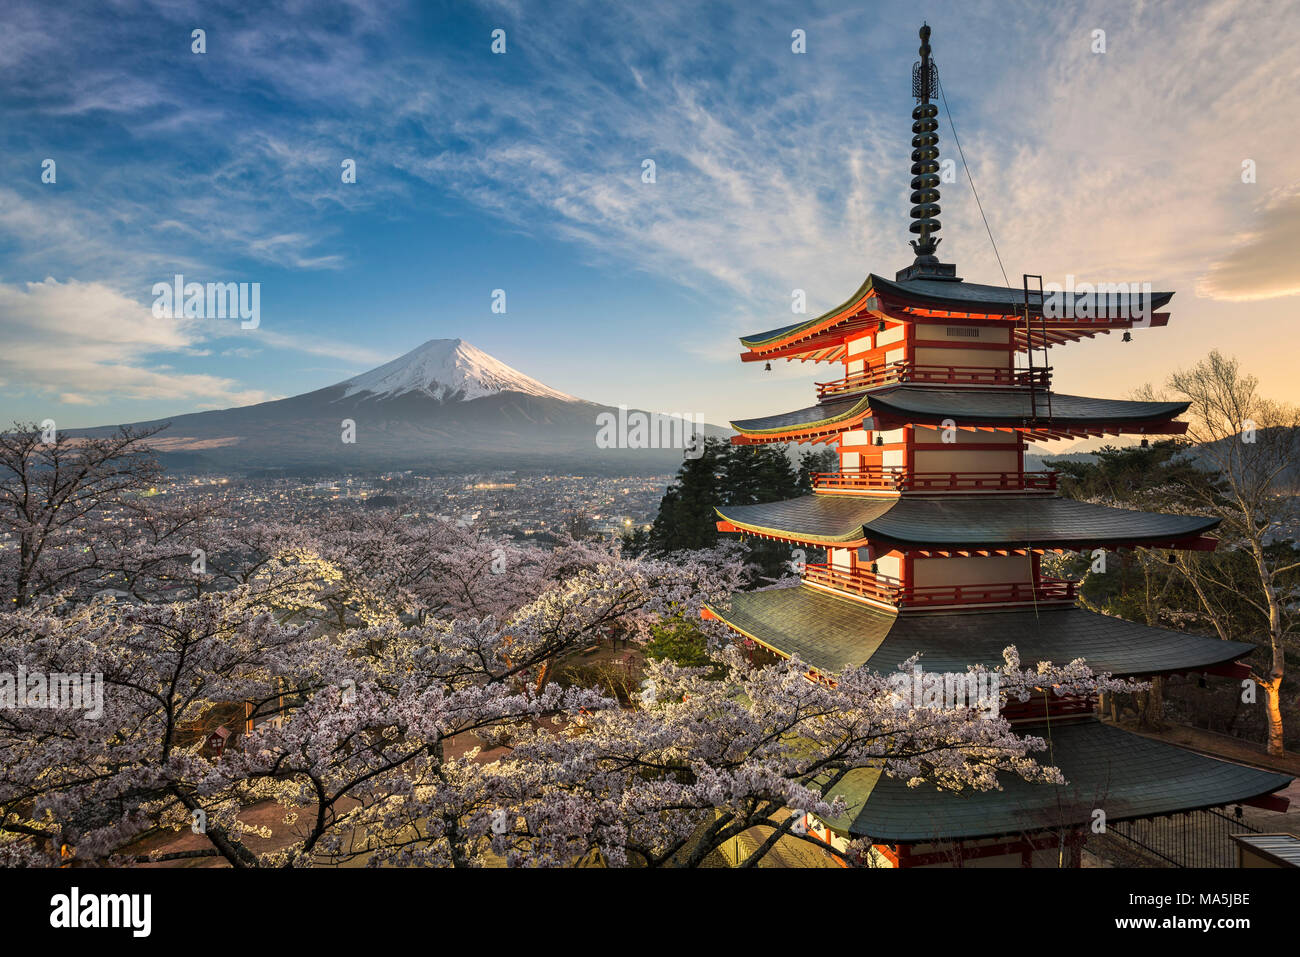 Mount Fuji with a red pagoda in spring season with cherry blossoms, Japan Stock Photo